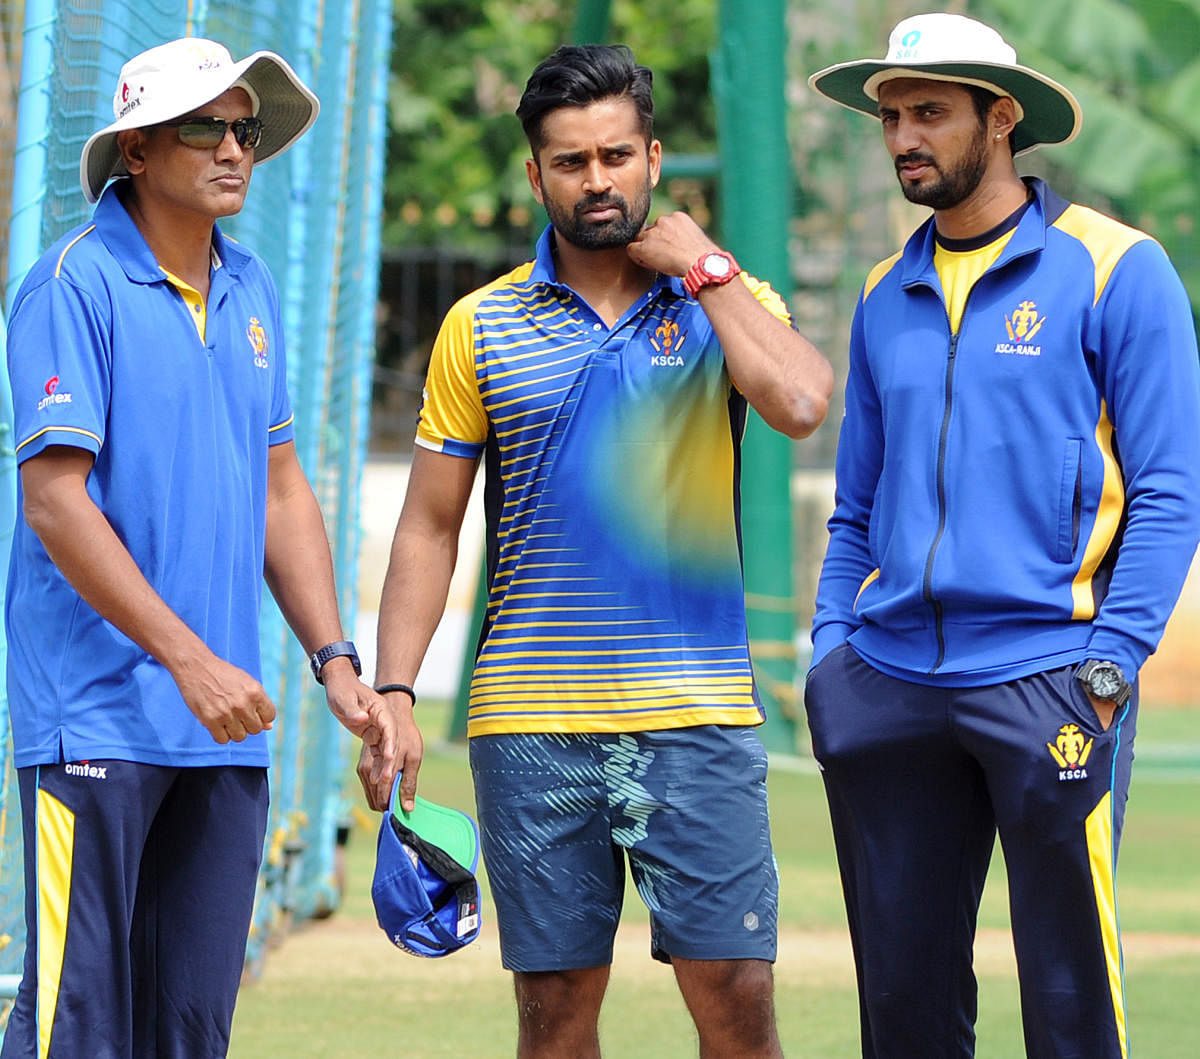 Karnataka cricket team captain R Vinay Kumar in chat with team goach Yeregud and bowling coach S Aravind during nets practice session at Chinnaswamy stadium in Bengaluru on Tuesday. Photo Srikanta Sharma R.